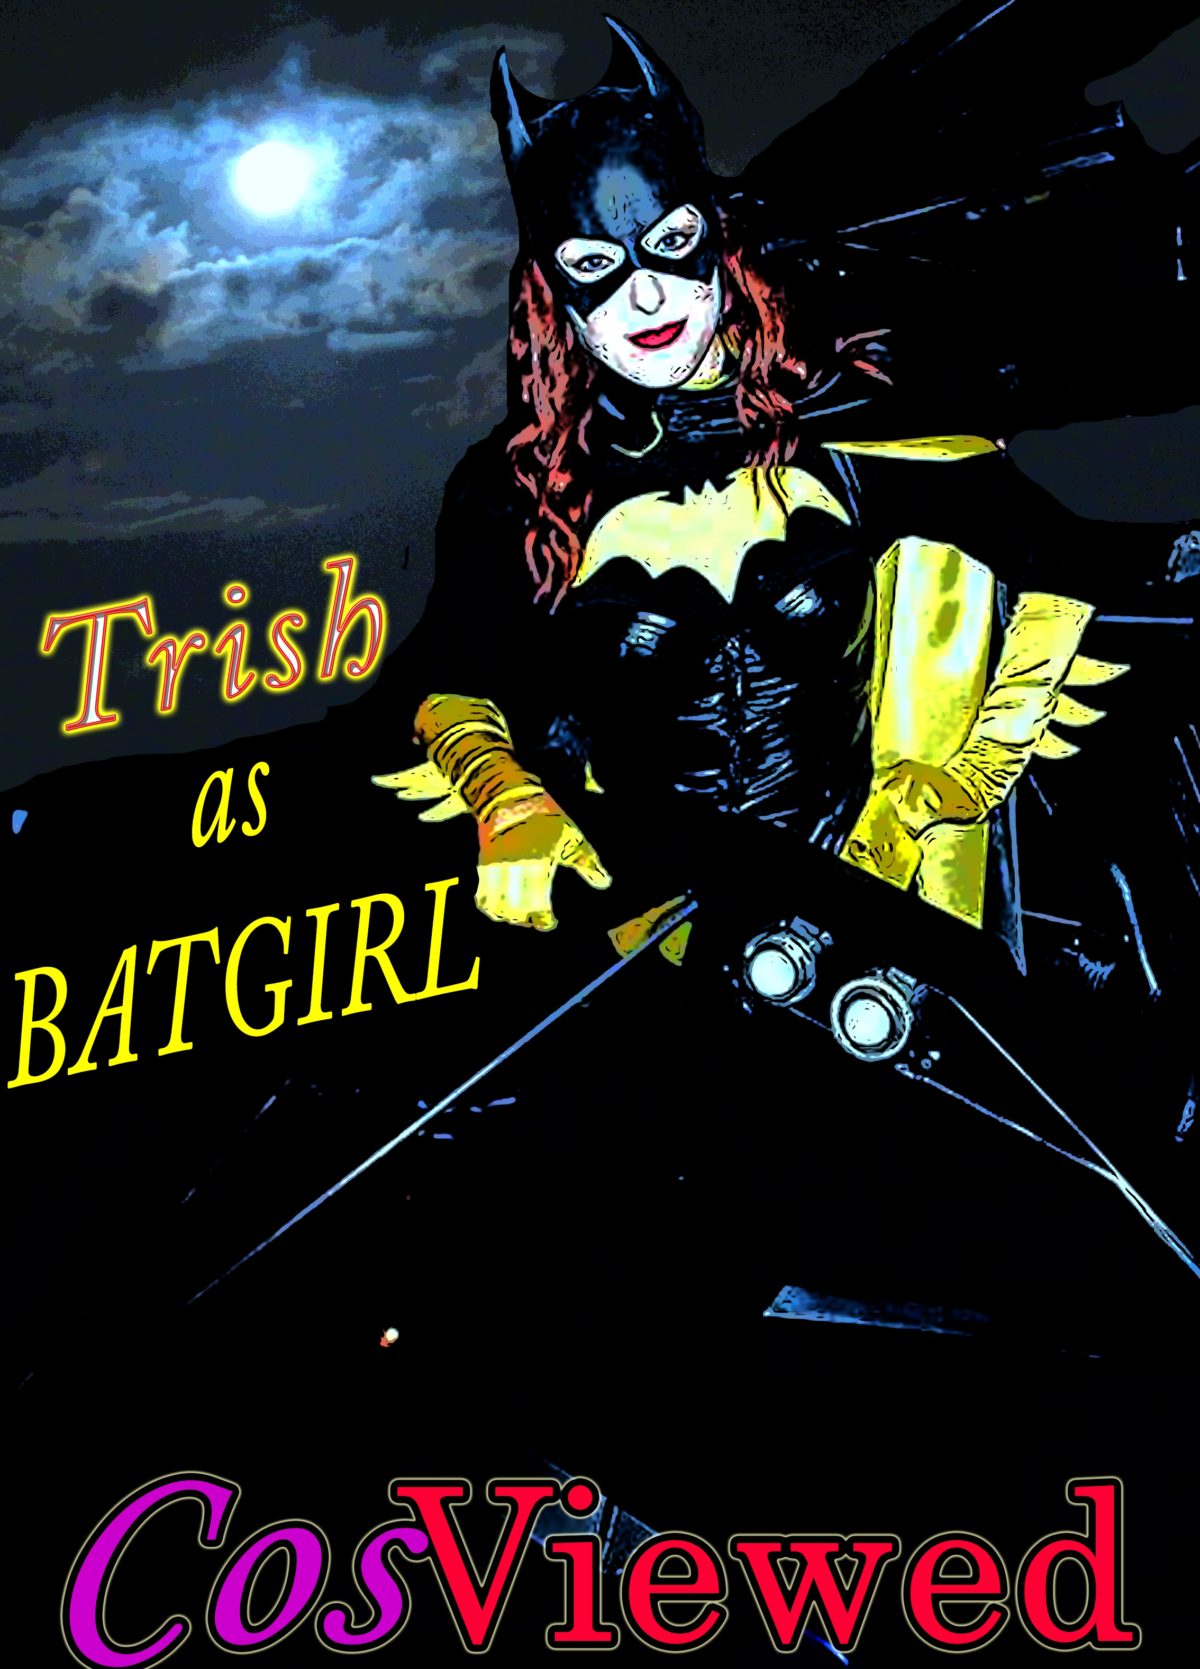 A NEW CosView Card is here: Trish as BATGIRL